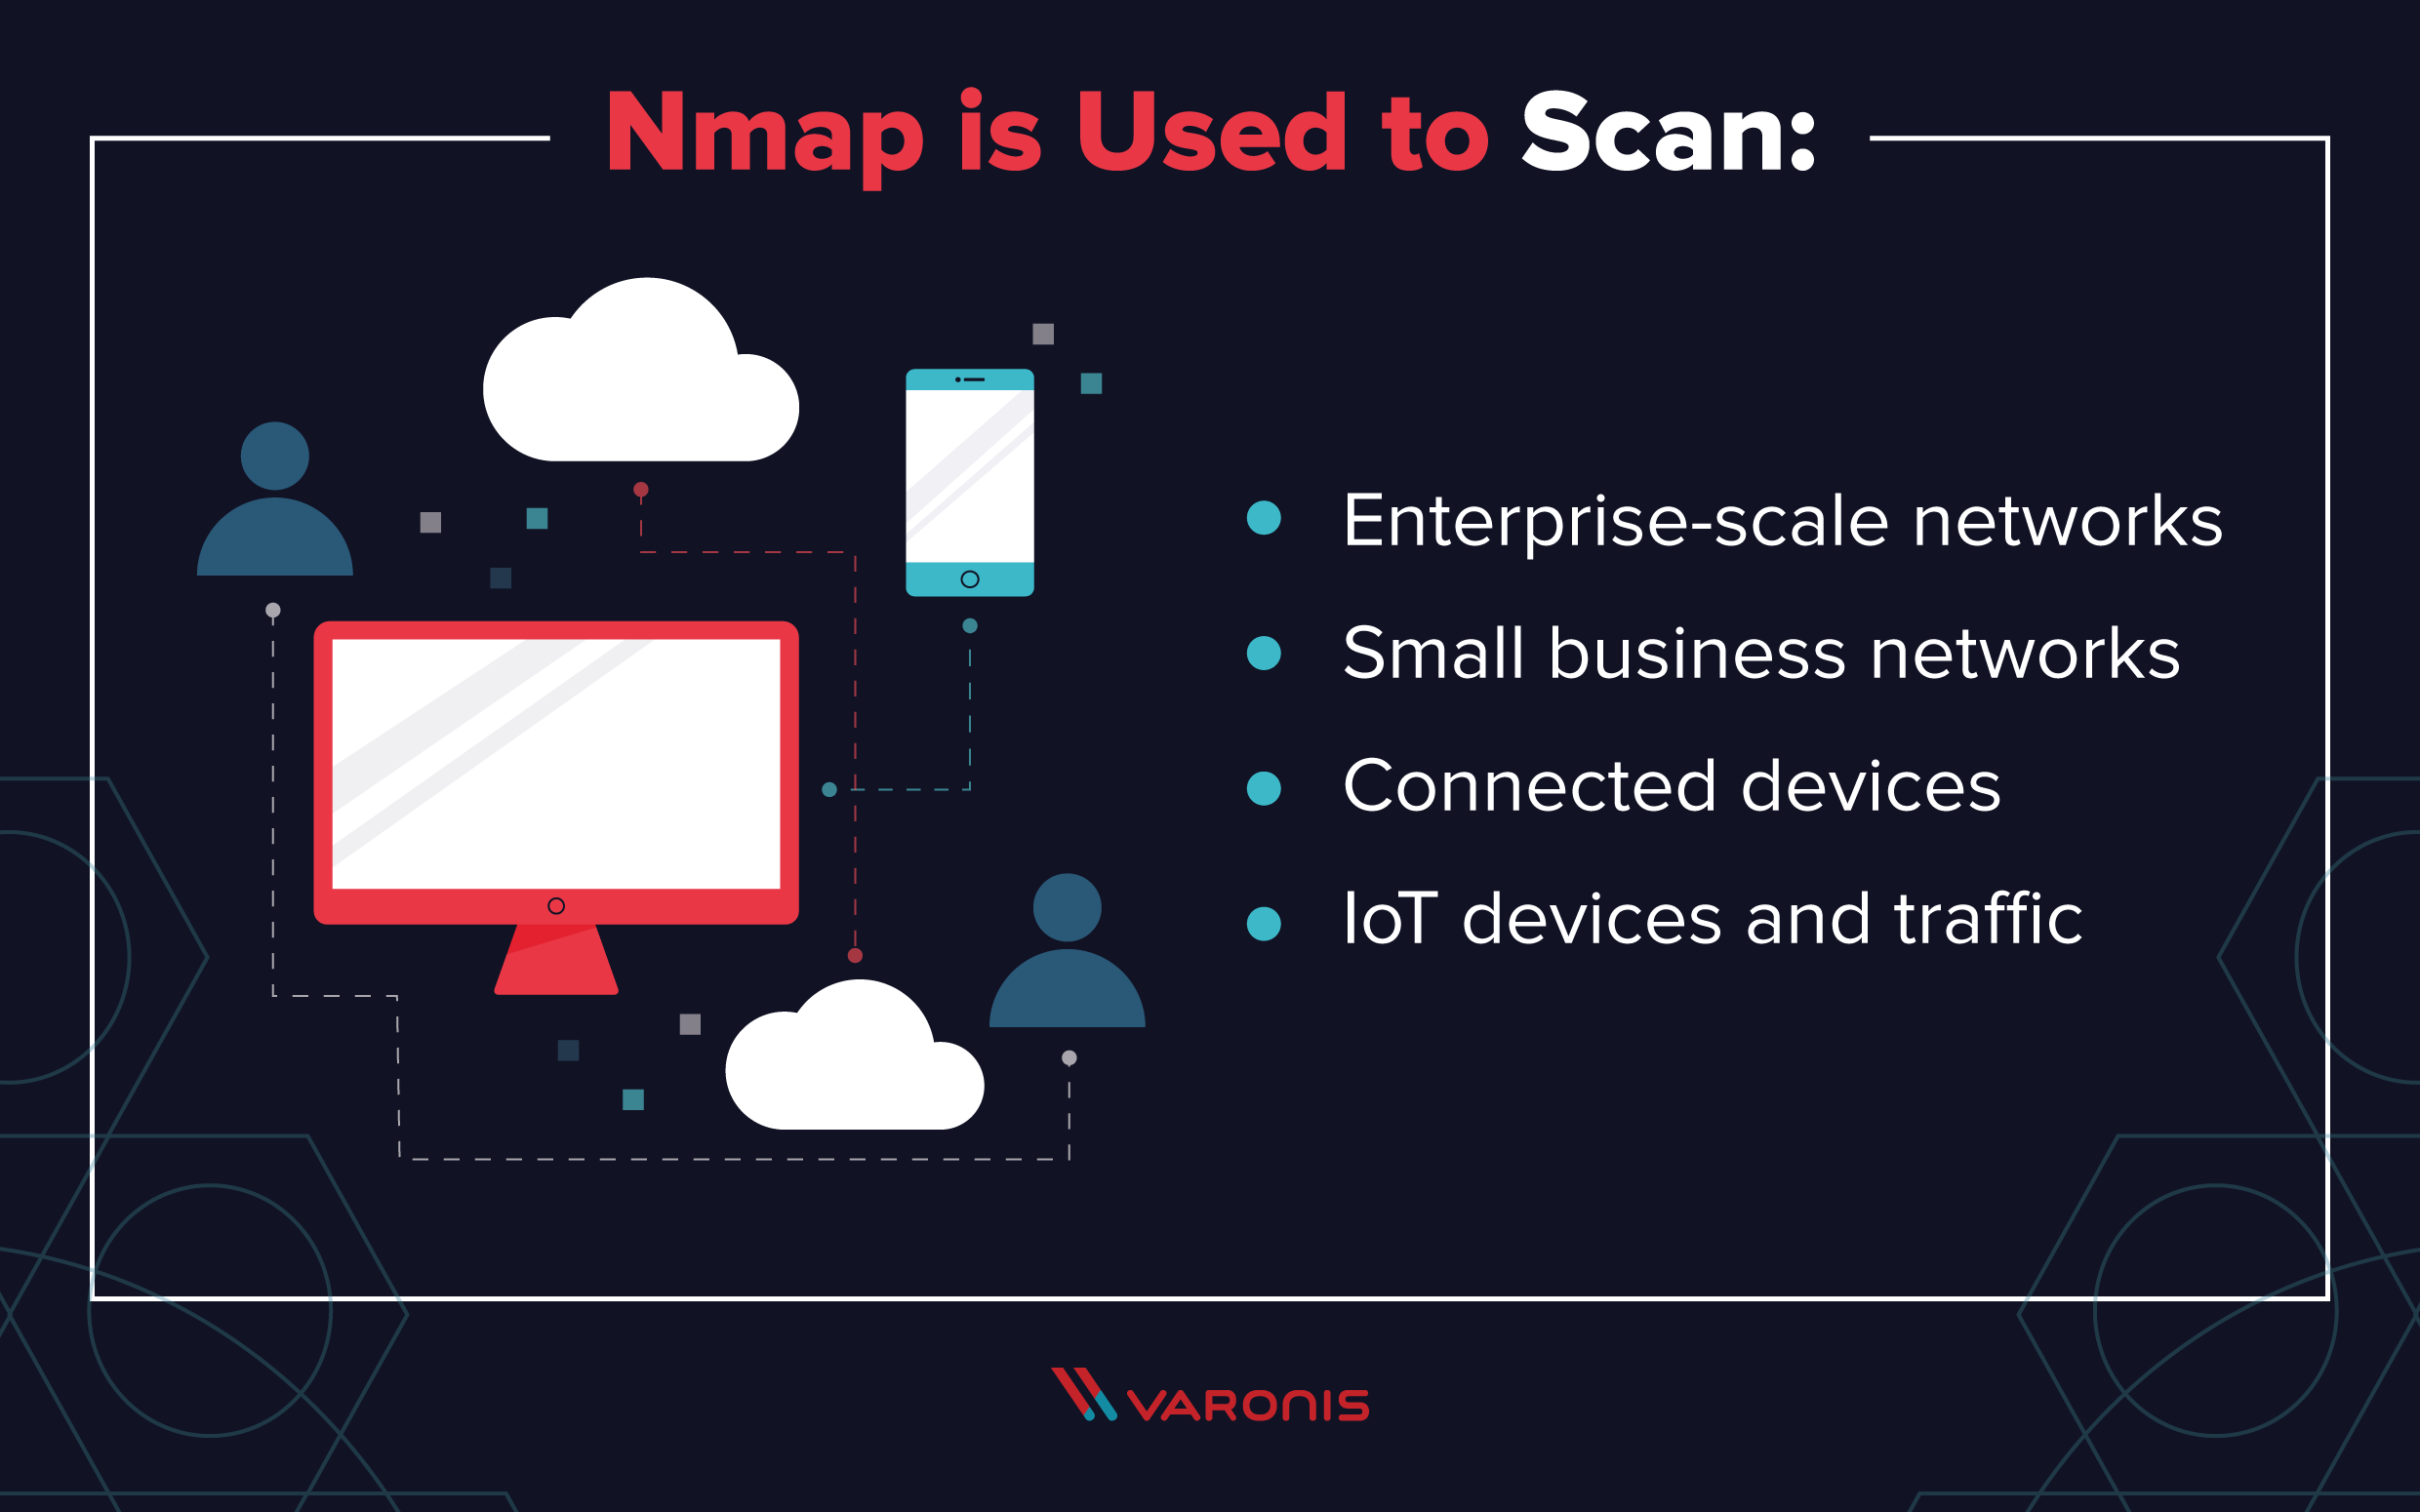 Nmap uses including networks, IoT devices and other devices